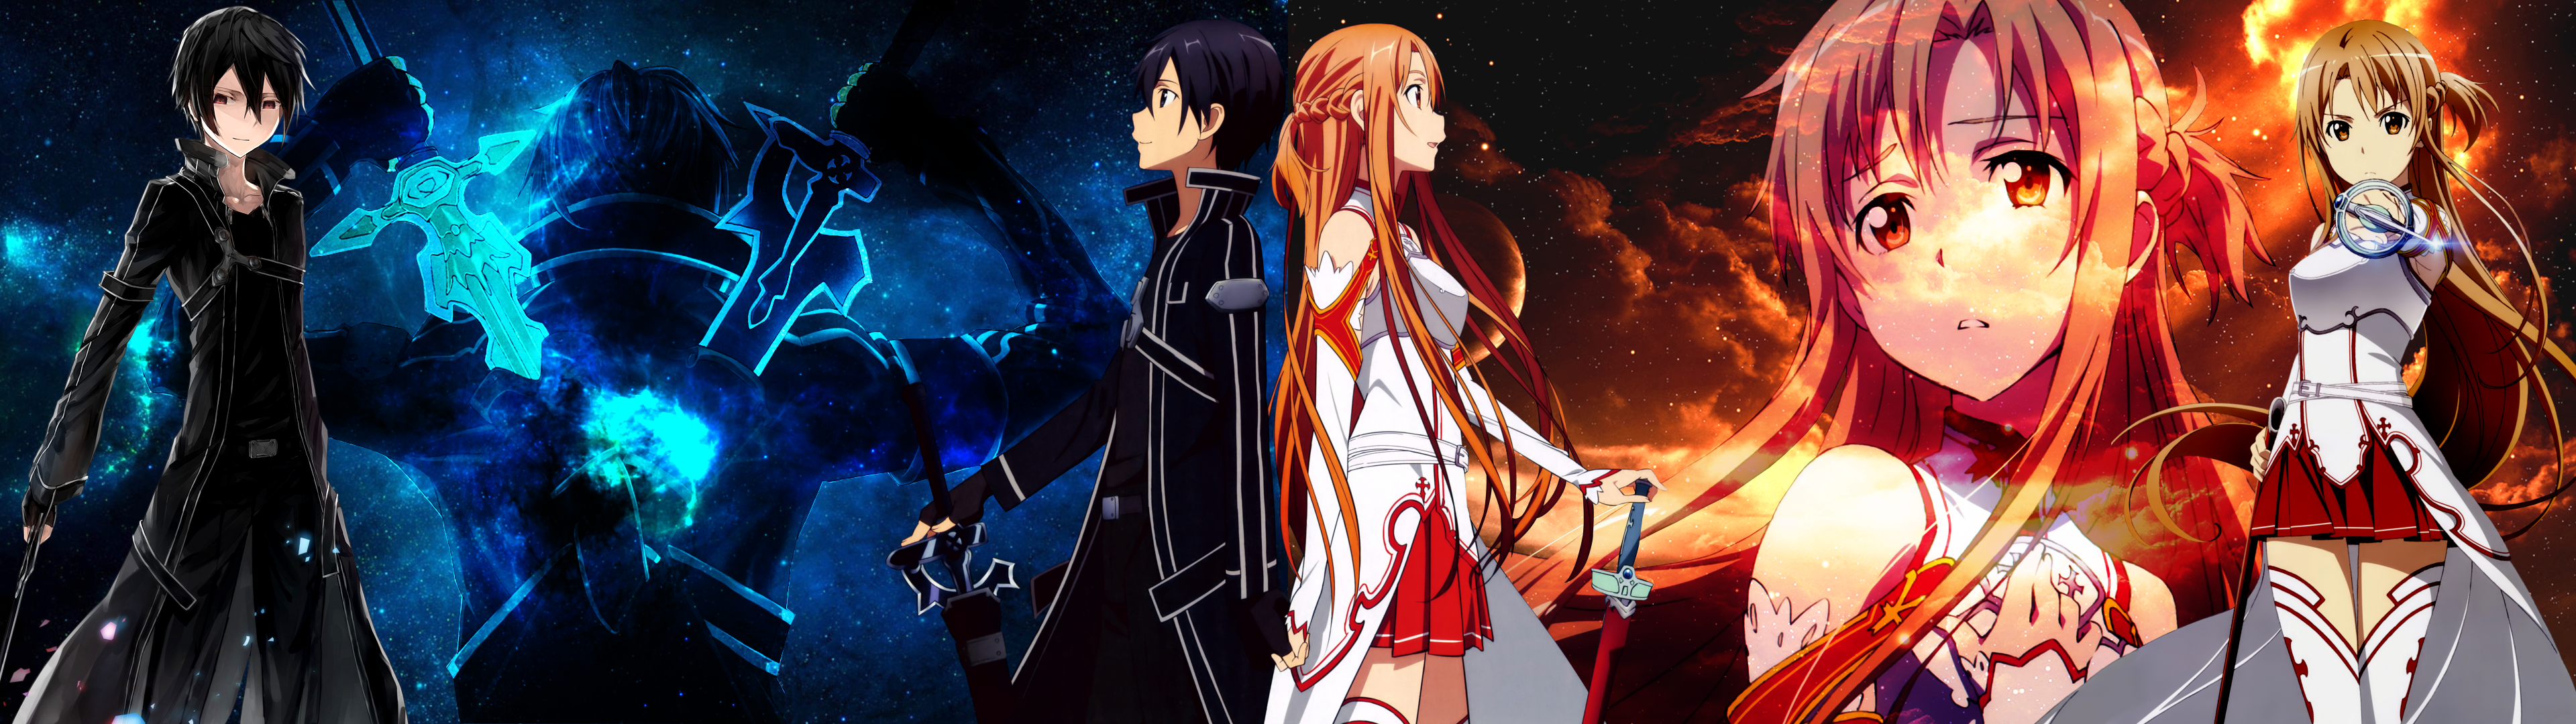 2600 Sword Art Online HD Wallpapers and Backgrounds